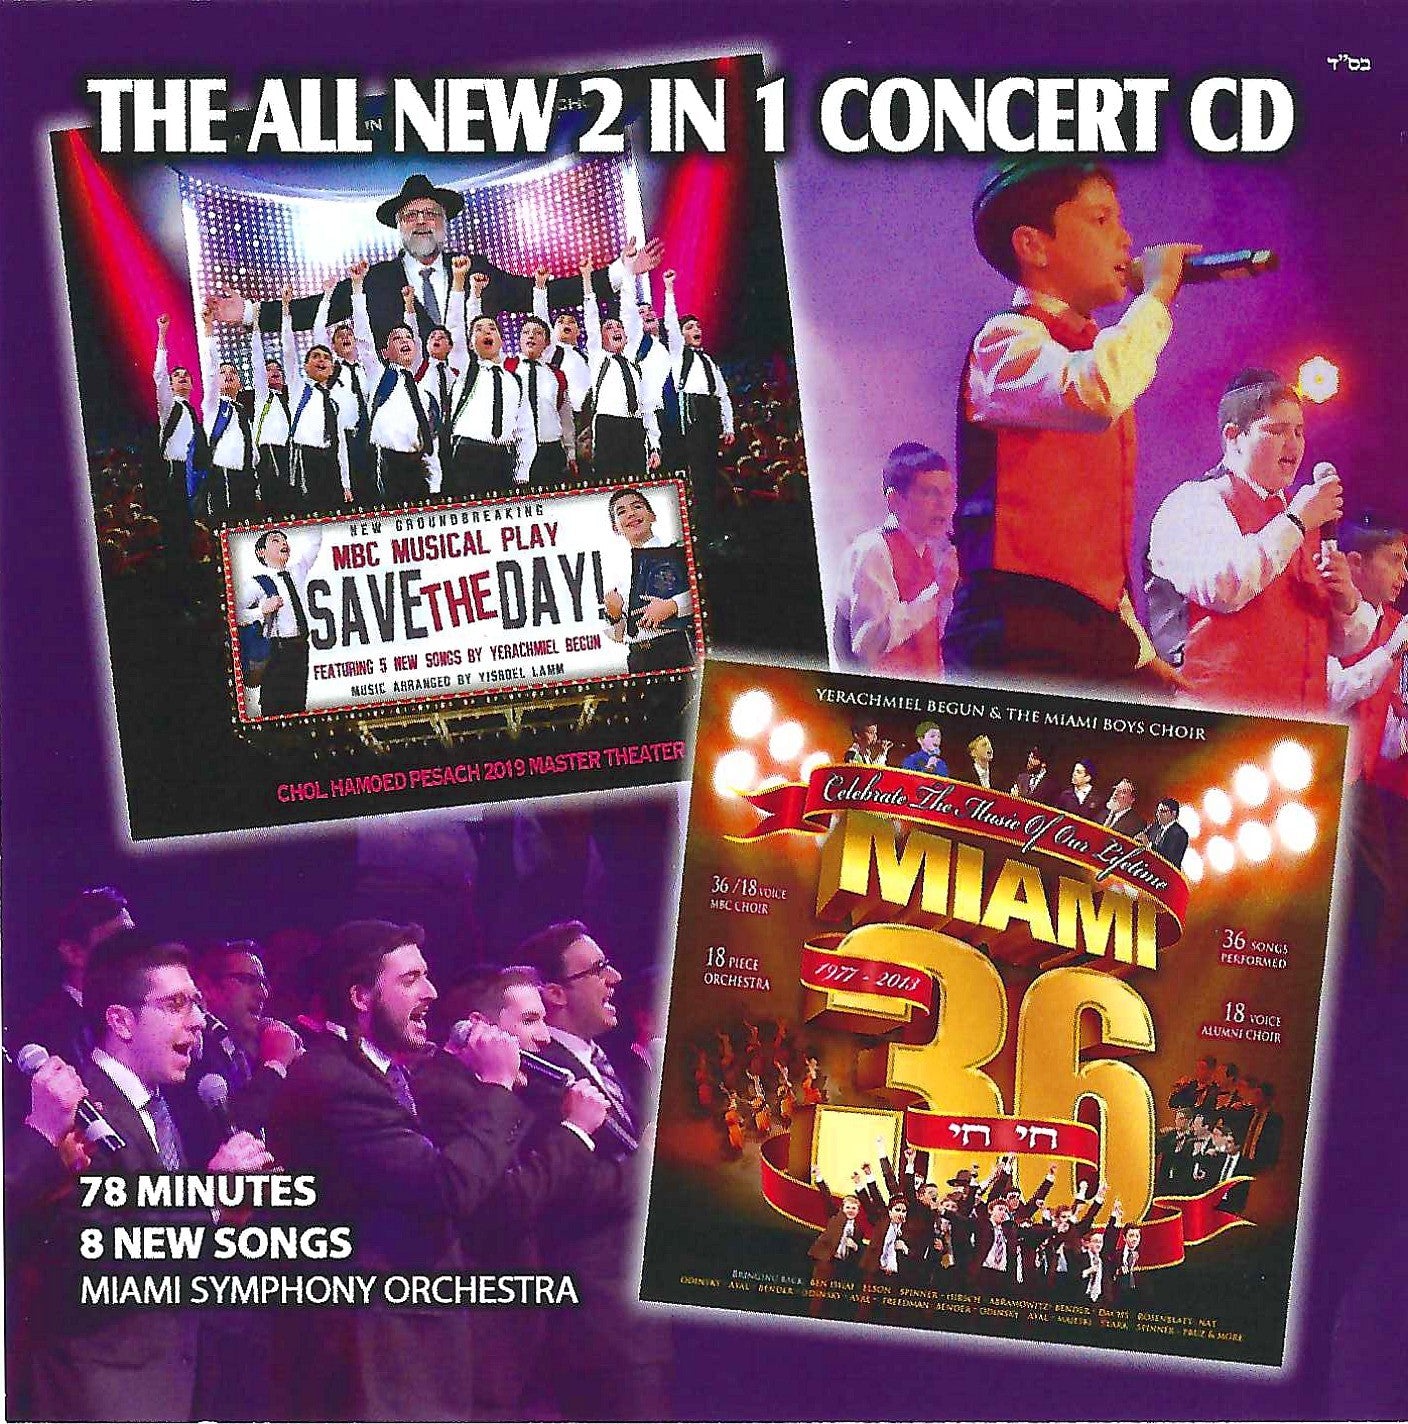 Miami - The All New 2 in 1 Concert CD